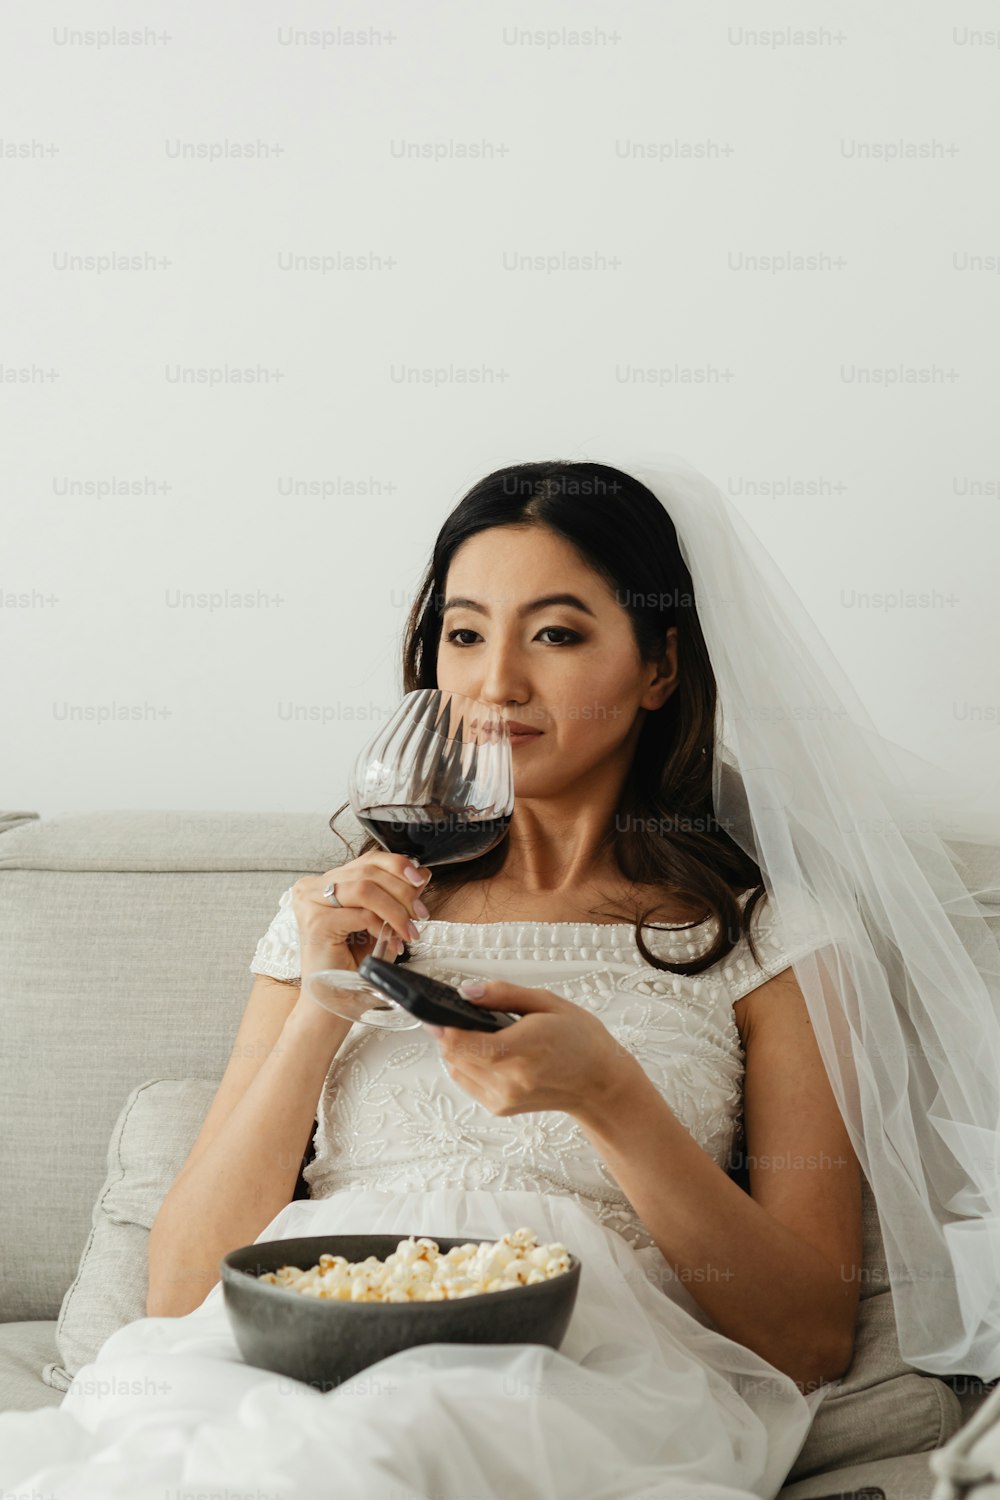 a woman sitting on a couch holding a glass of wine